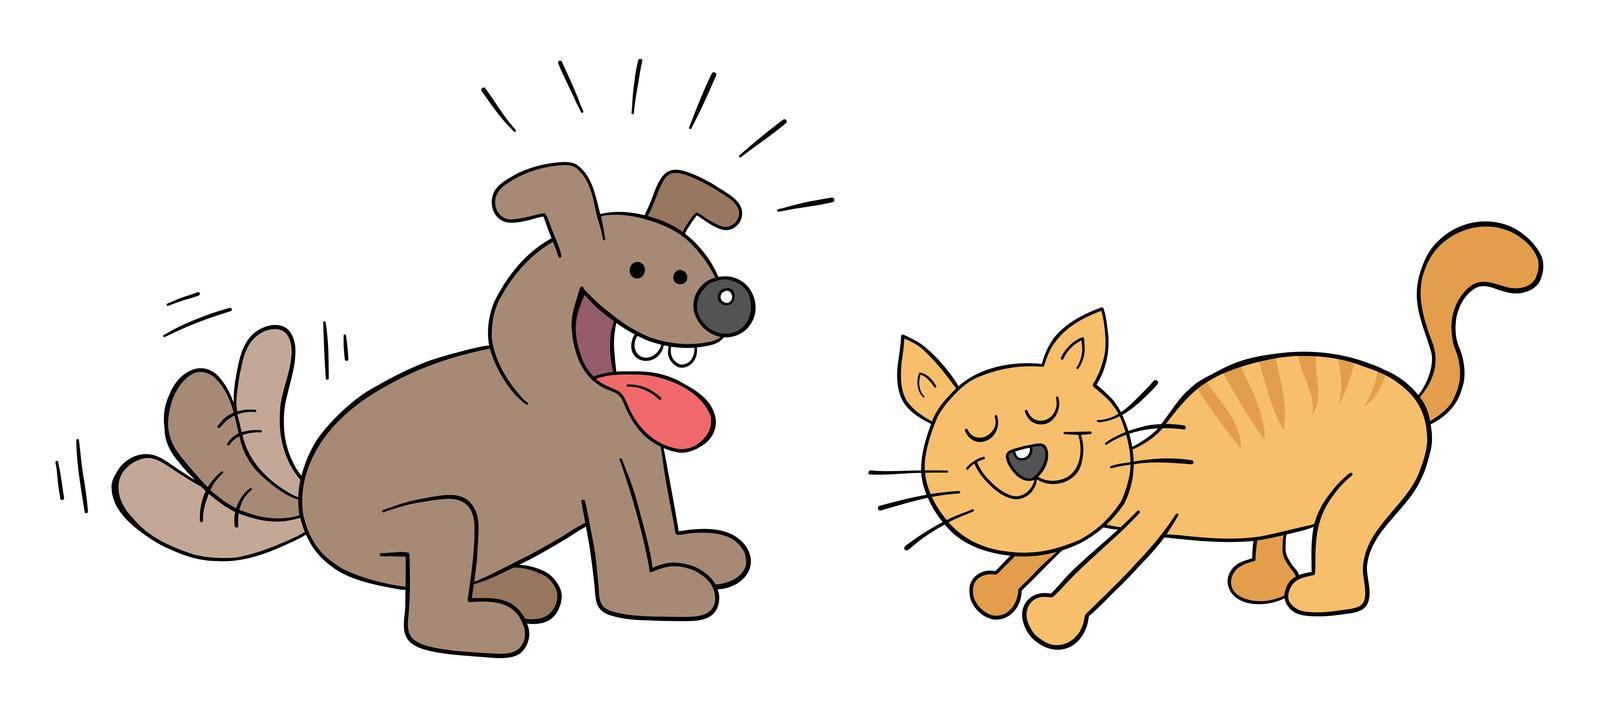 Cartoon happy dog and cat friendship, vector illustration. Colored and black outlines.